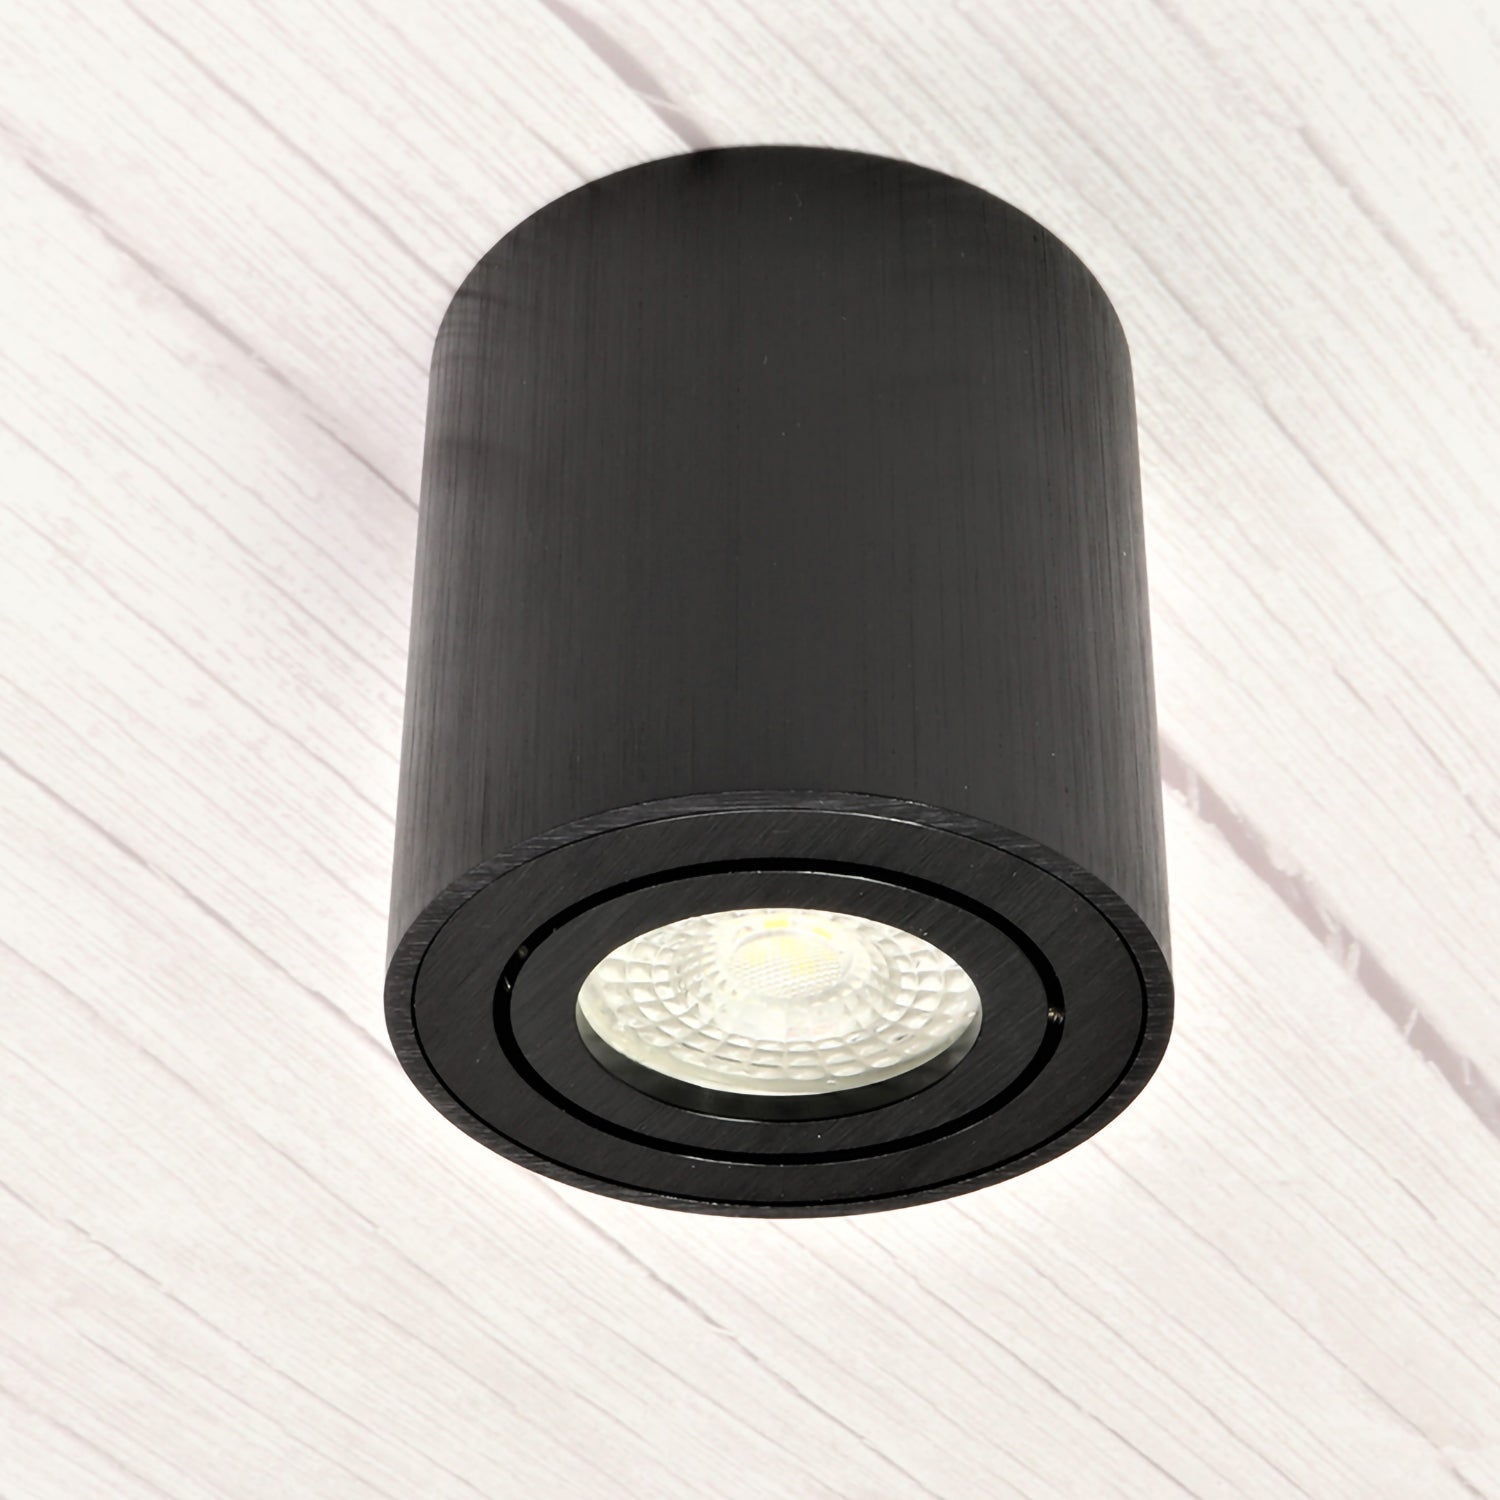 novoom LED GU10 Dimmable 6.2W surface-mounted spotlight 230V light light ceiling – Round Surface-mounted Milano Black